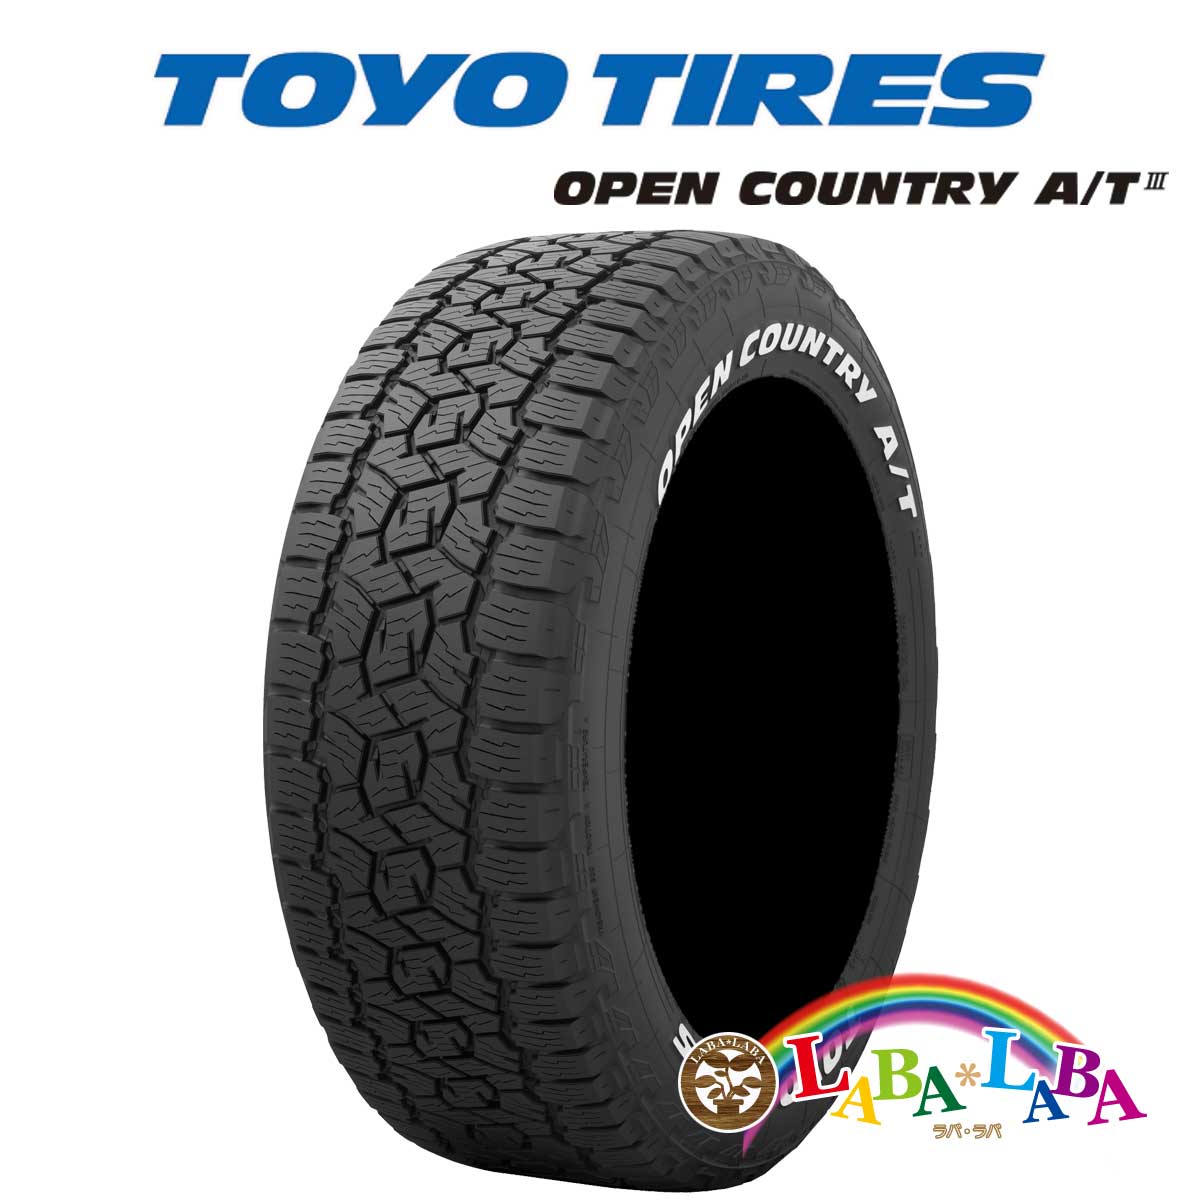 TOYO OPEN COUNTRY A/TIII (A/T3) WL 175/80R16 91S オールテレーン ホワイトレター 4本セット